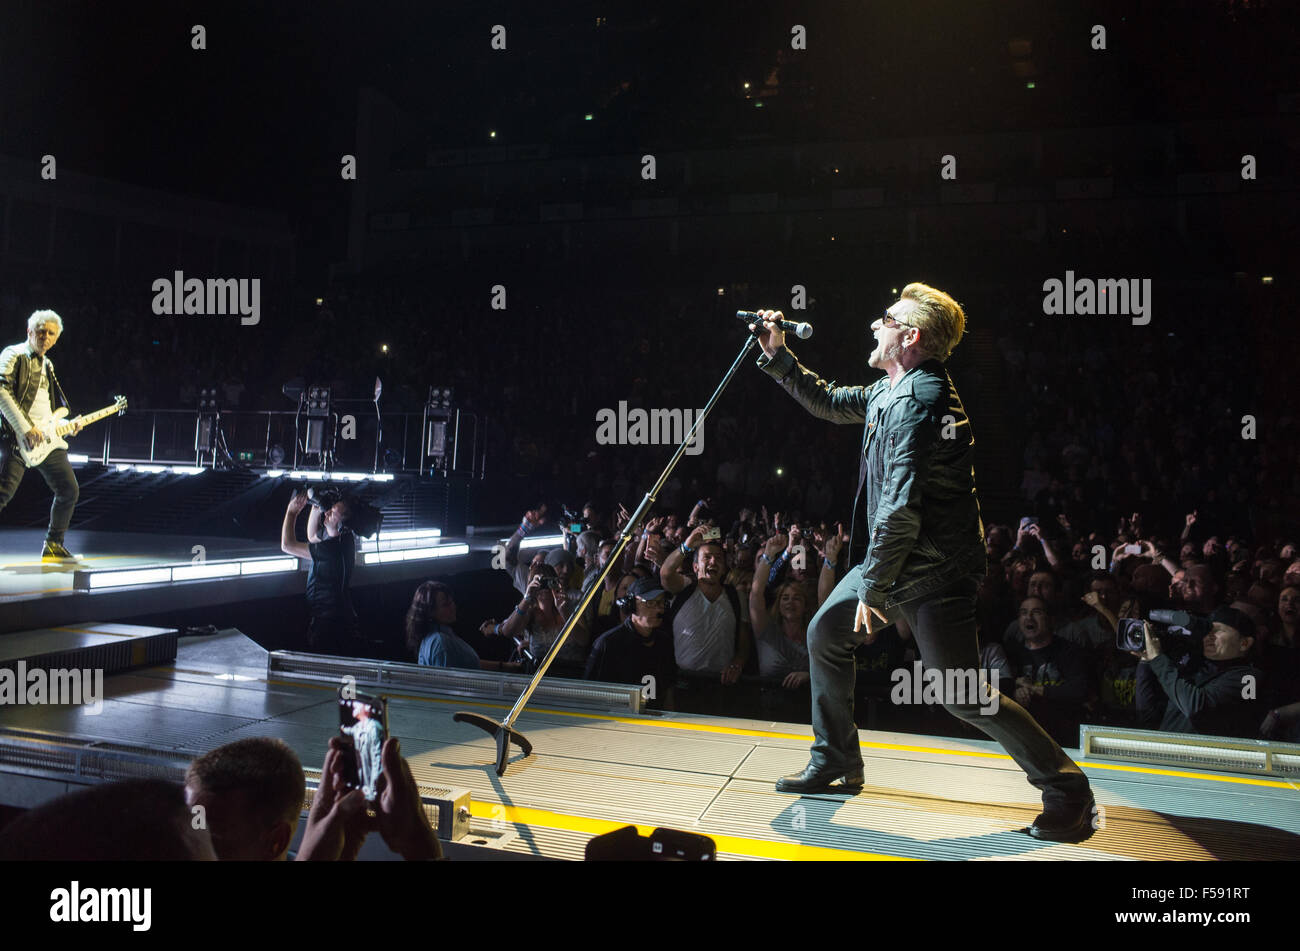 U2 iNNOCENCE eXPERIENCE 2015 World Tour PHOTO Print POSTER Band 22 Cities 